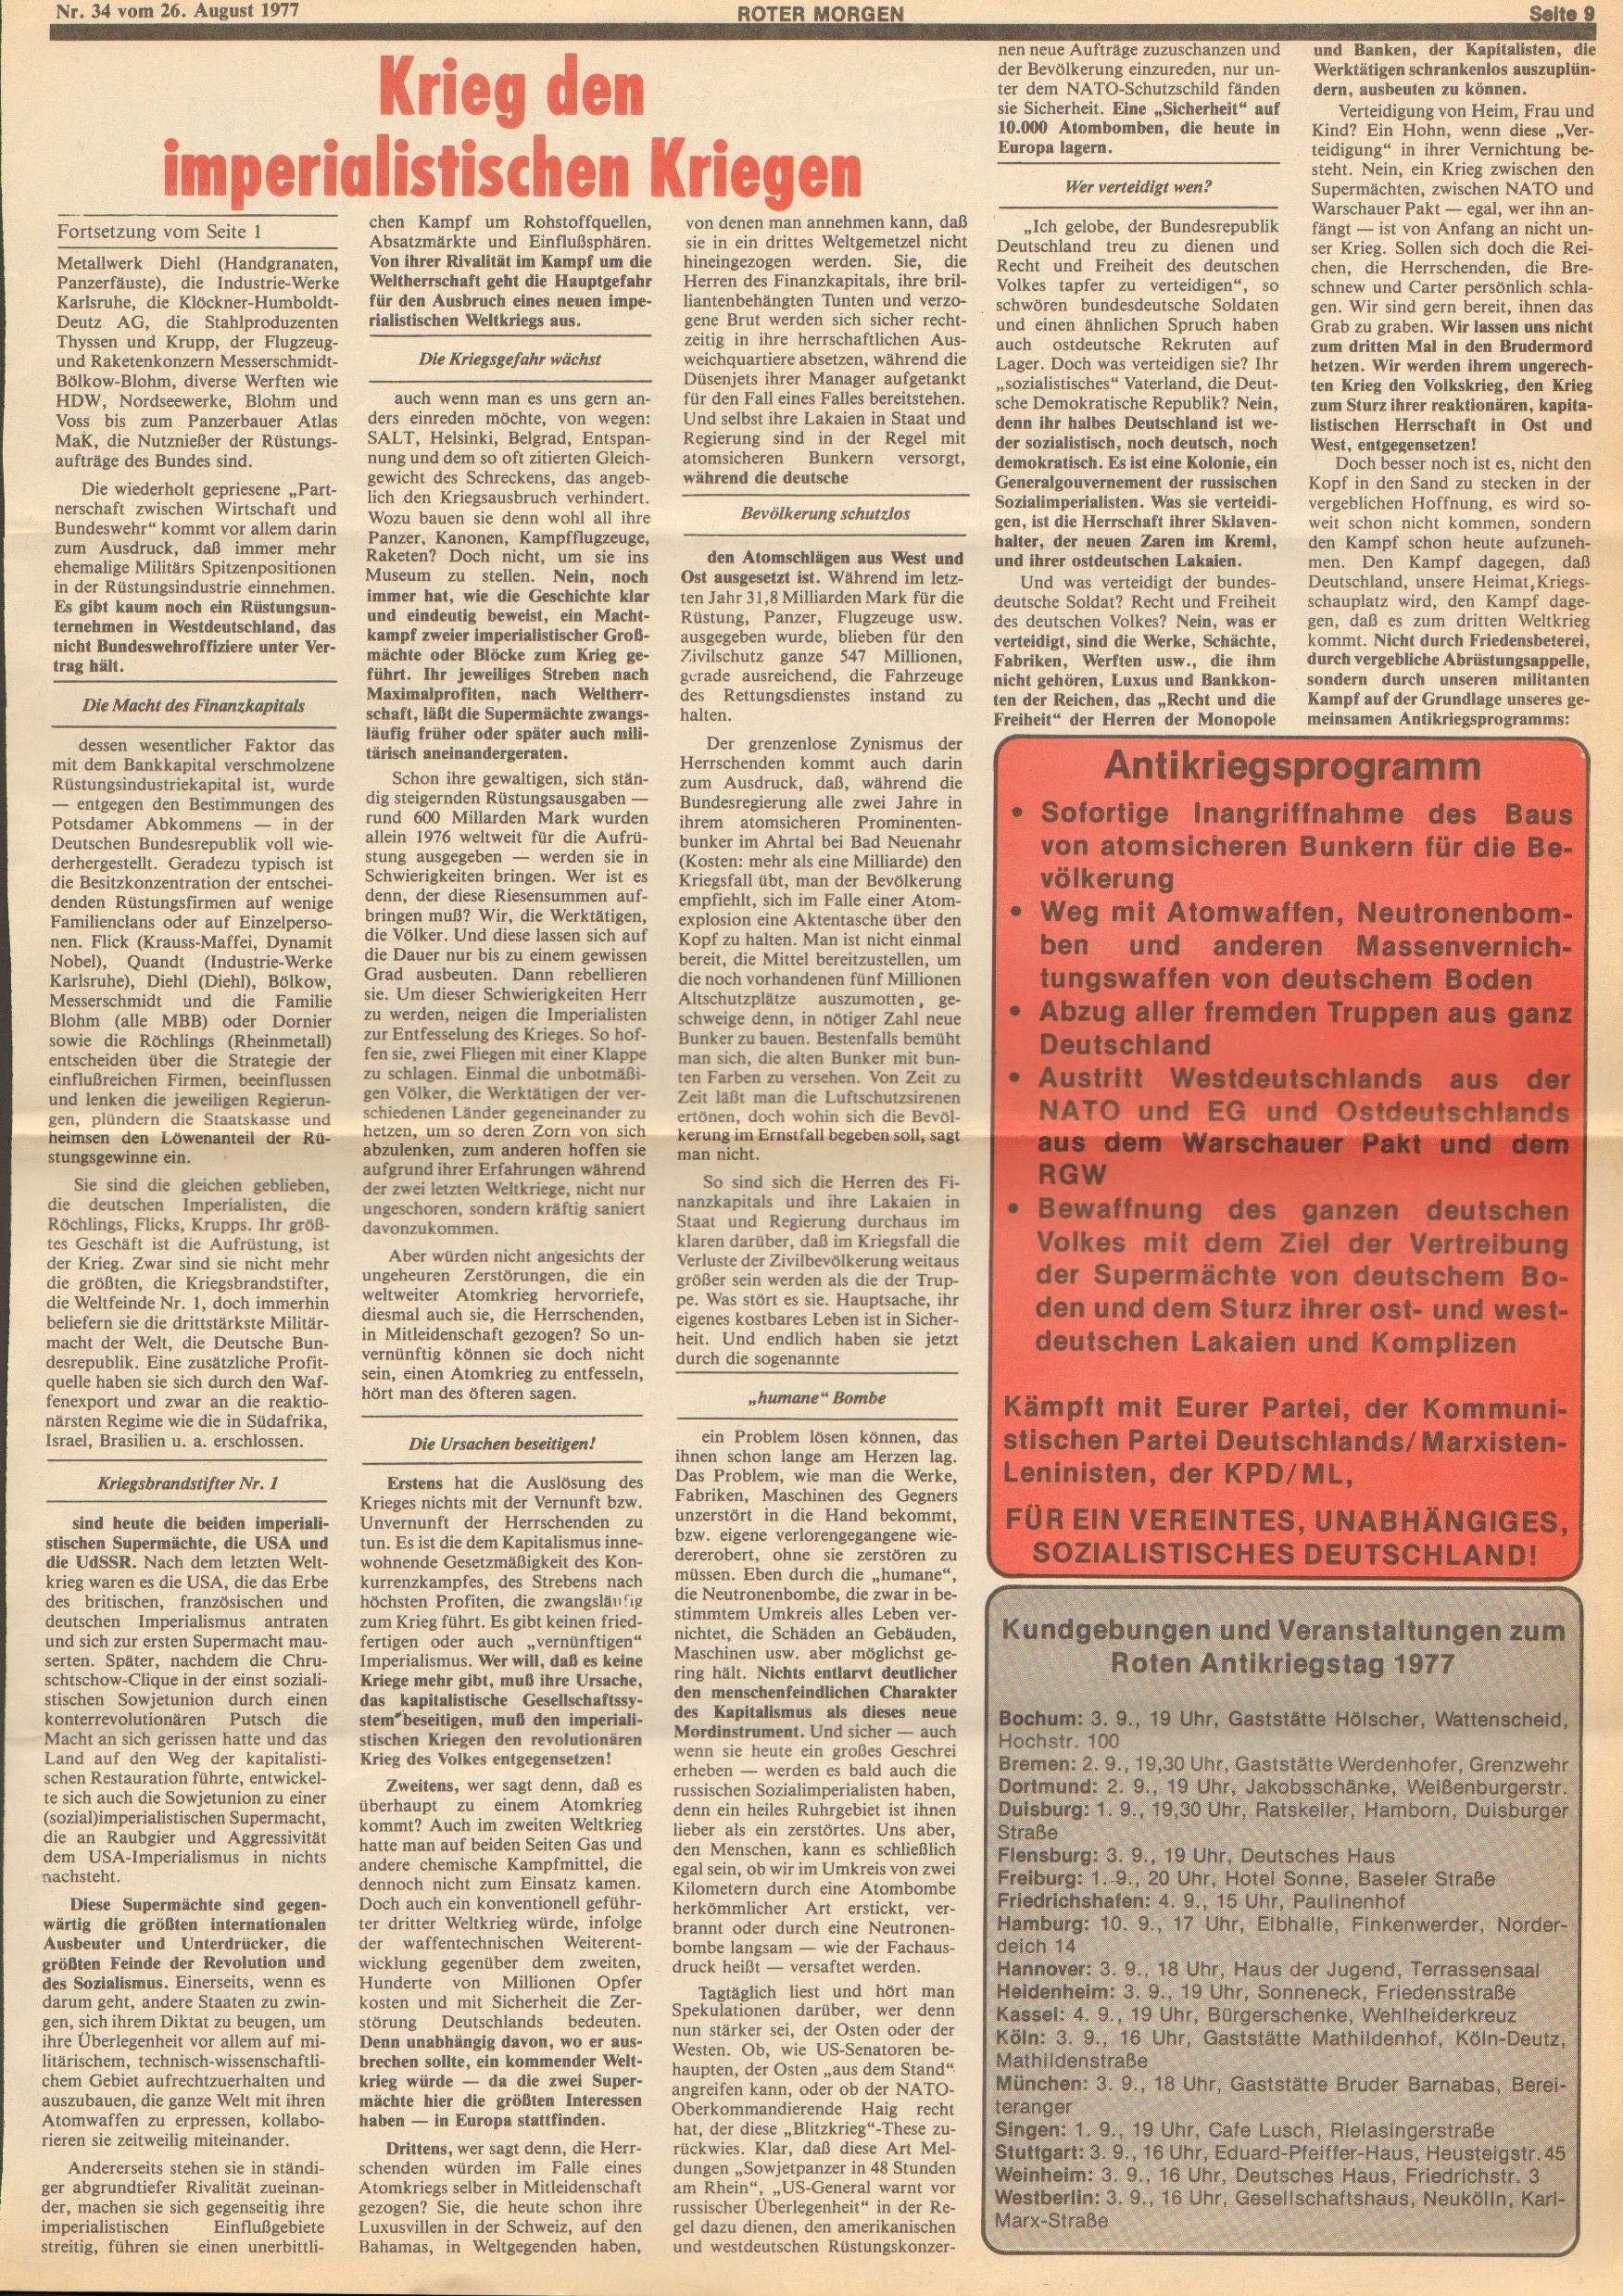 Roter Morgen, 11. Jg., 26. August 1977, Nr. 34, Seite 9